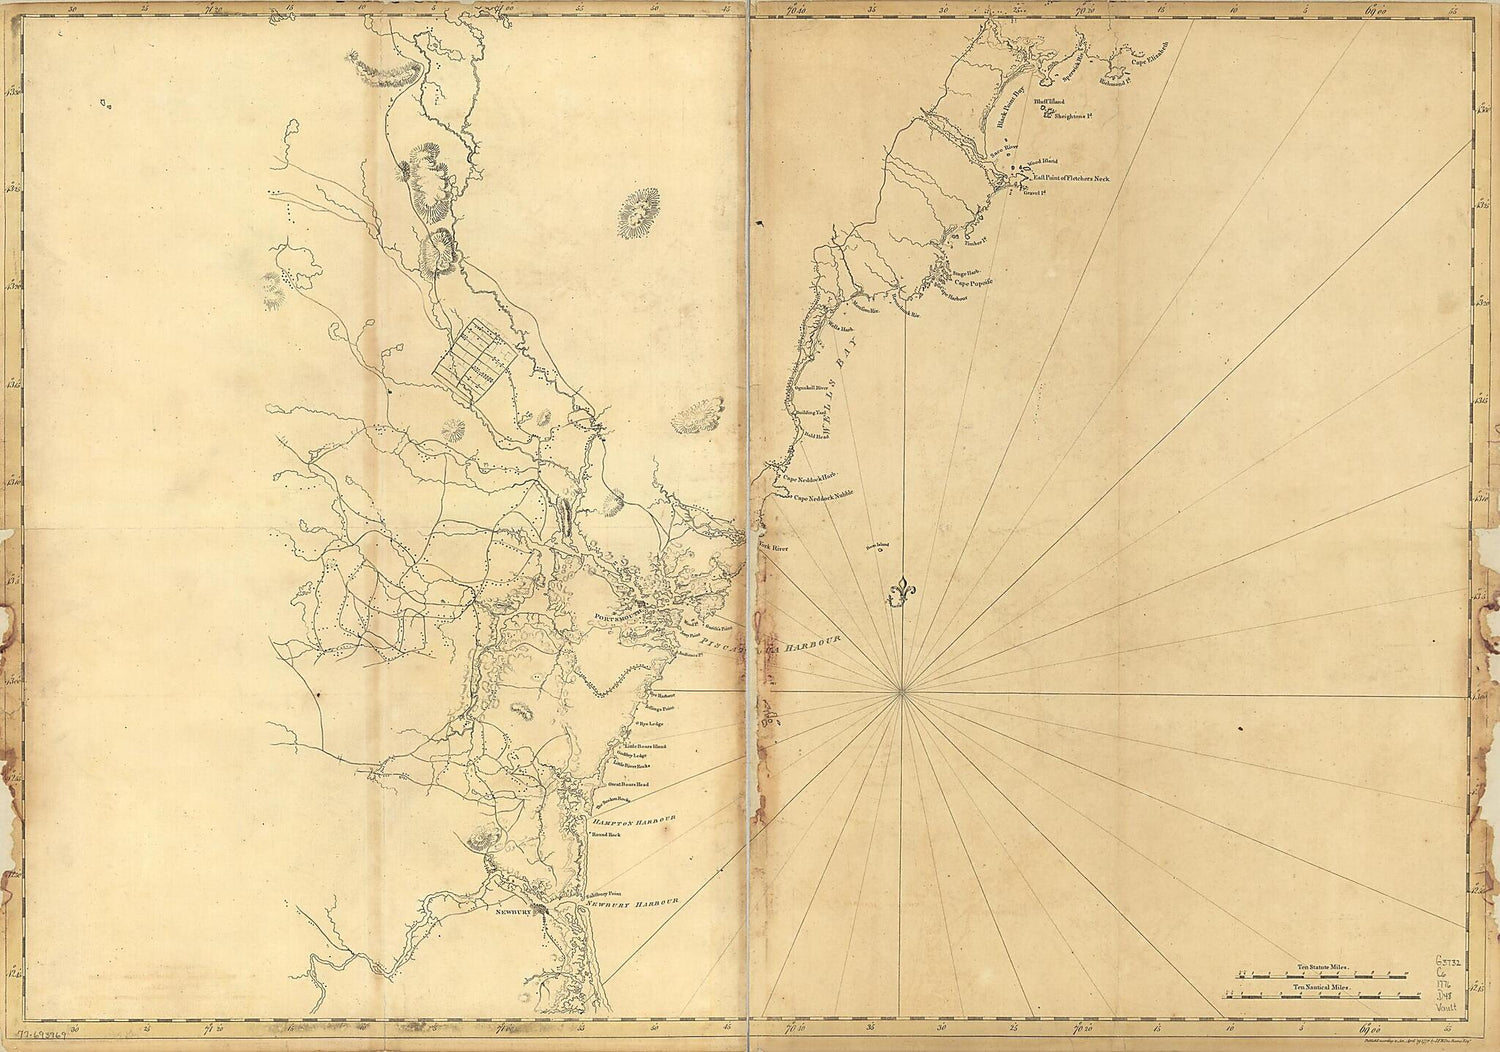 This old map of Coast of New England from Cape Elizabeth, Maine to Newburyport, Mass from 1776 was created by Joseph F. W. (Joseph Frederick Wallet) Des Barres in 1776